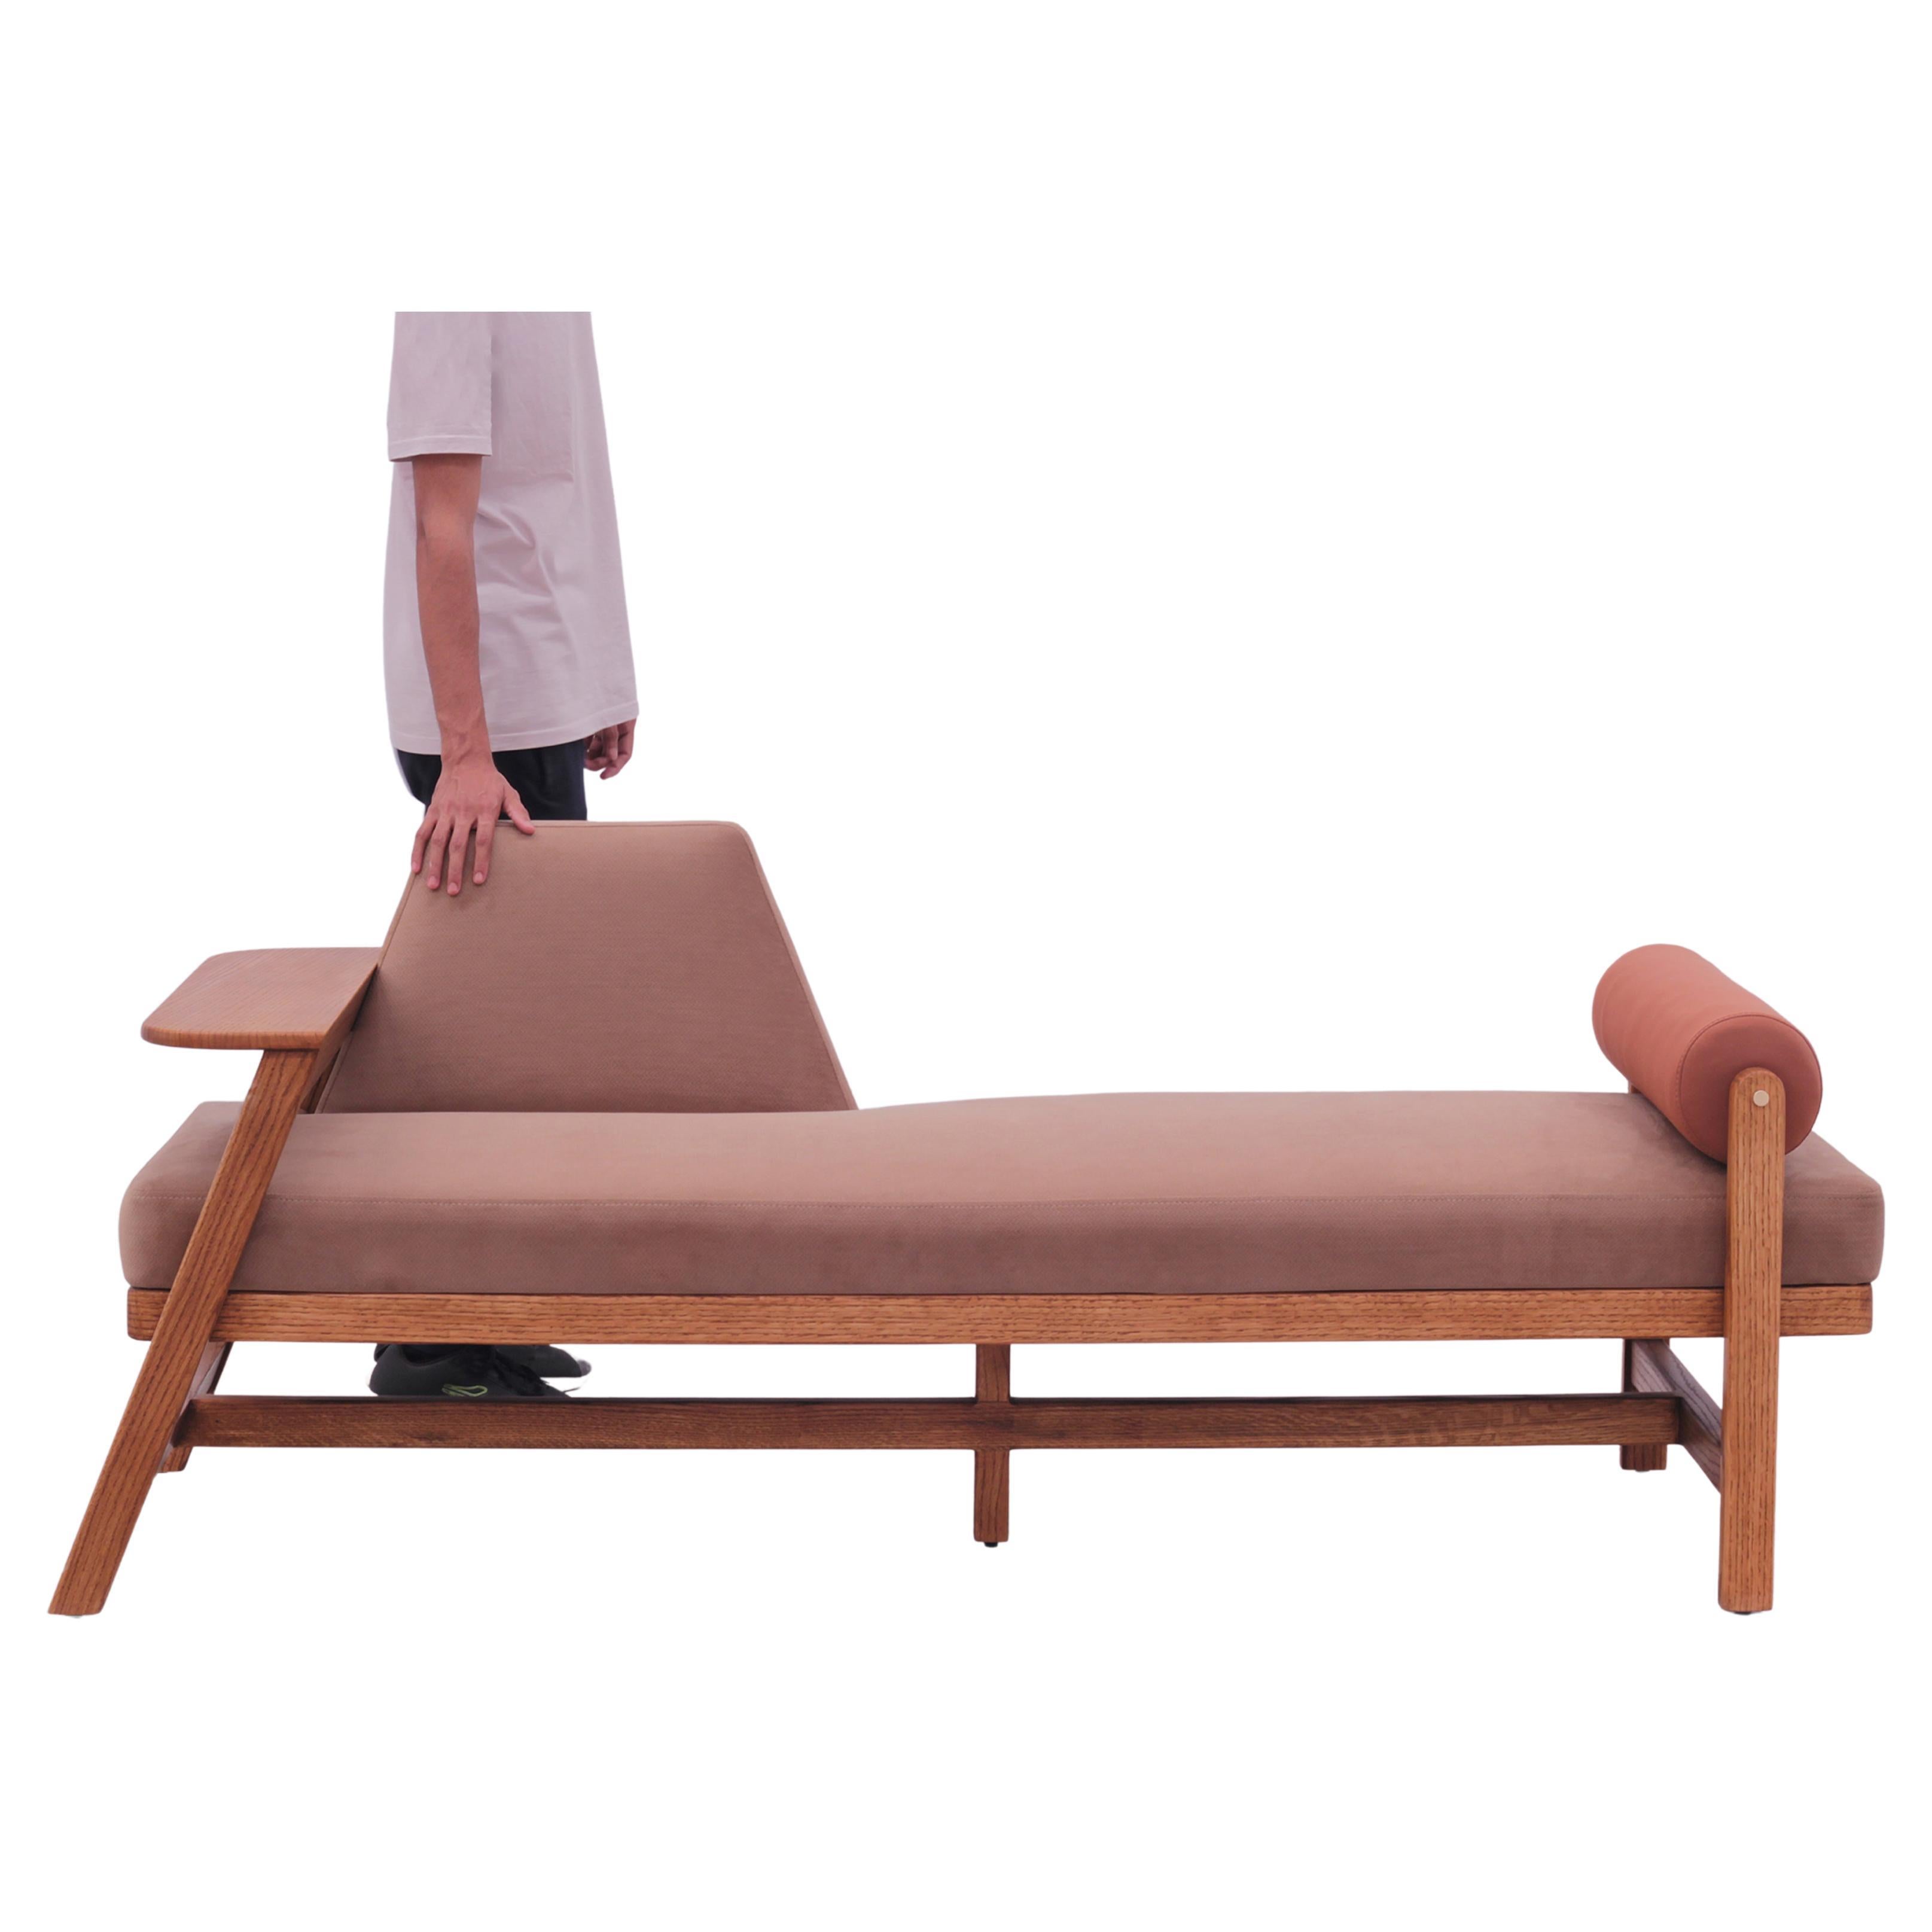 Minimal Solid Oak wood Contemporary SACHI Bench with bolster and brass detail For Sale